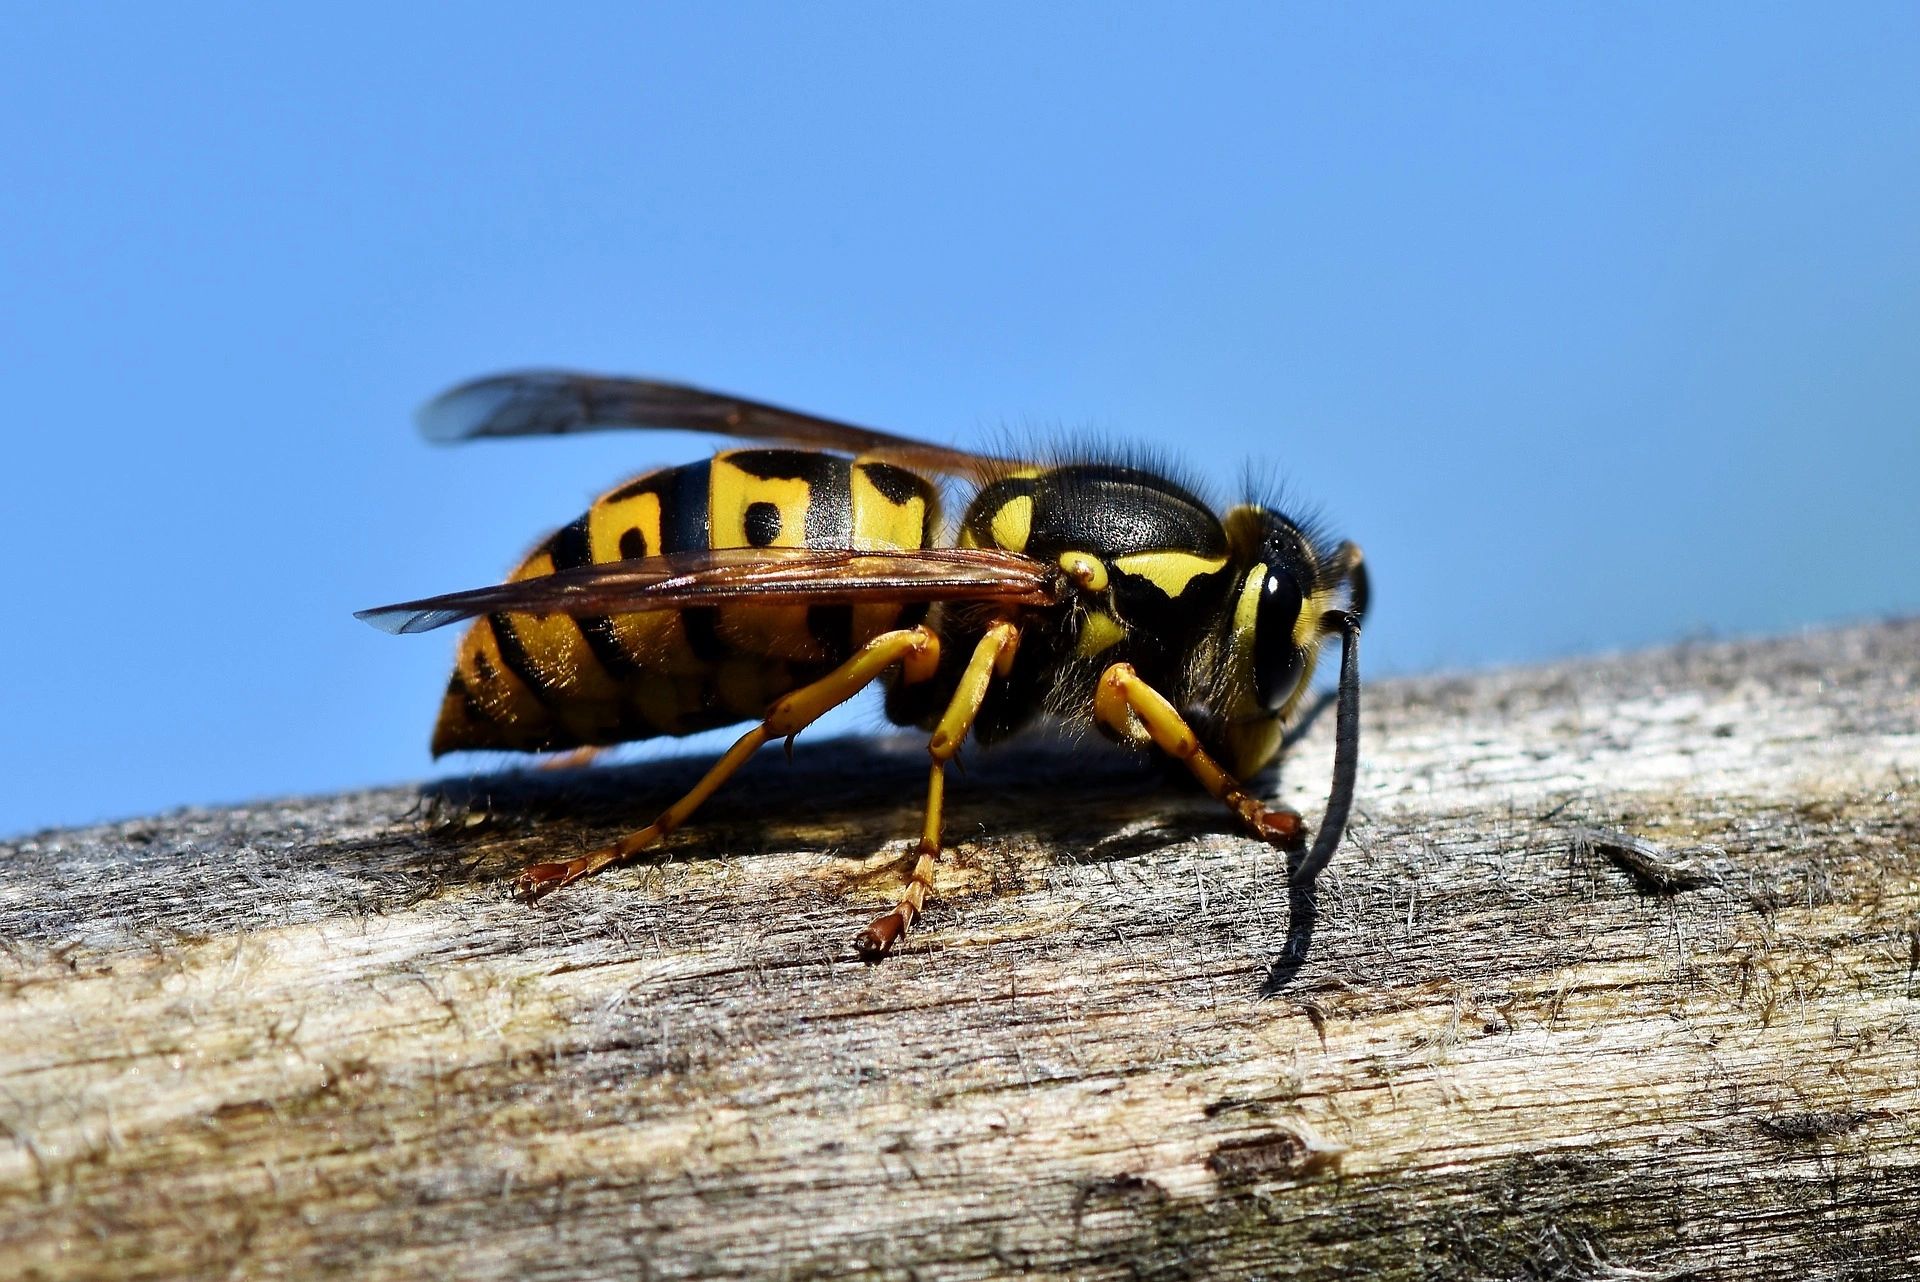 wasp control
Hornets 
Insect 